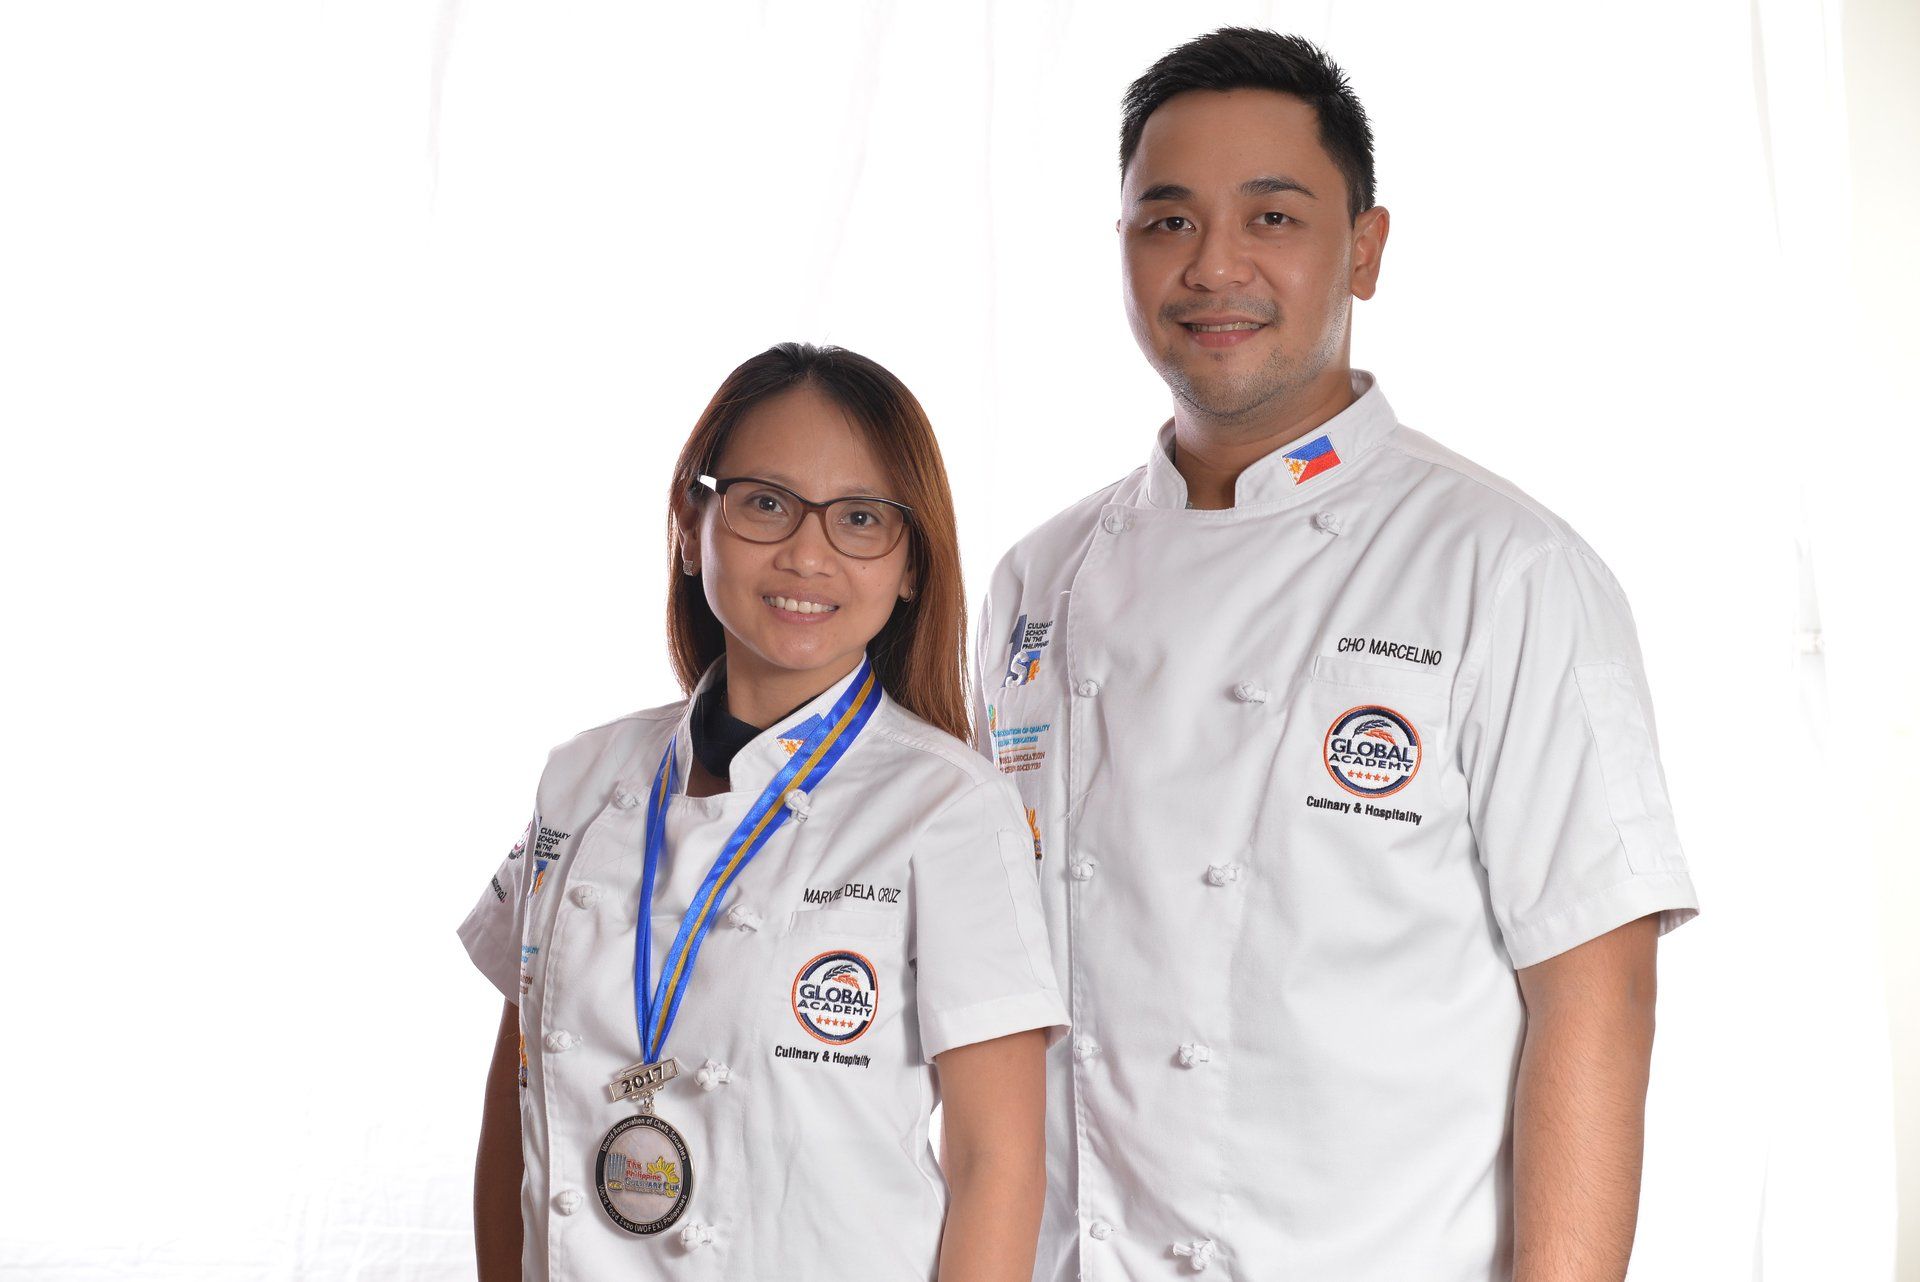 Global Academy of Culinary, Baking and Pastry Arts is the ONLY School and Institution to win the Overall Champion Title of the Philippine Culinary Cup 3 times!